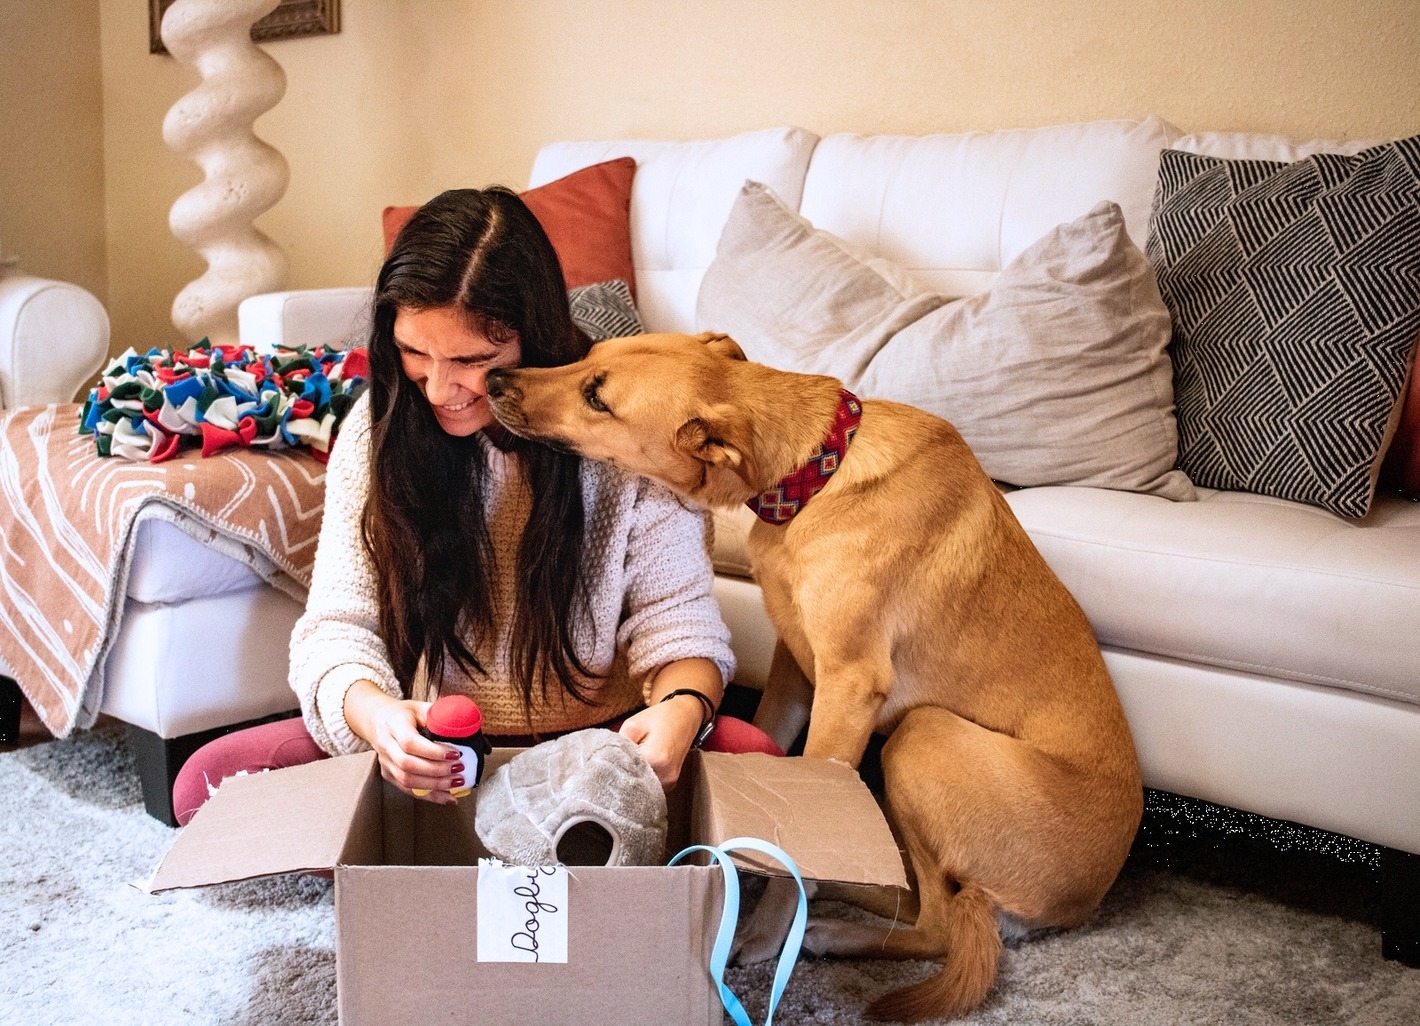 A model opening up the box with their dog